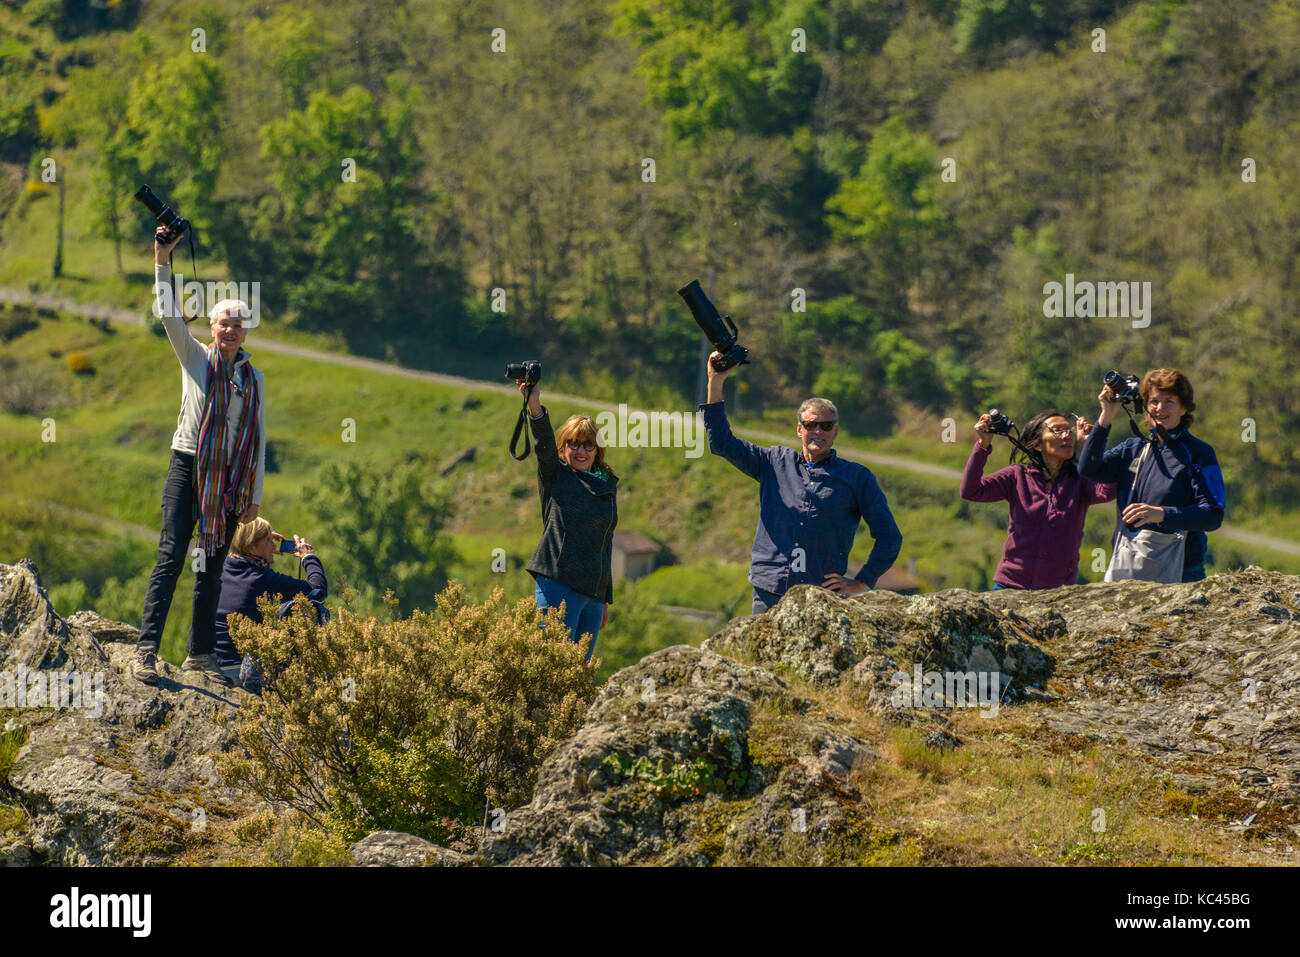 Group of photographers cheering with cameras held high, set against a such rural setting. Stock Photo